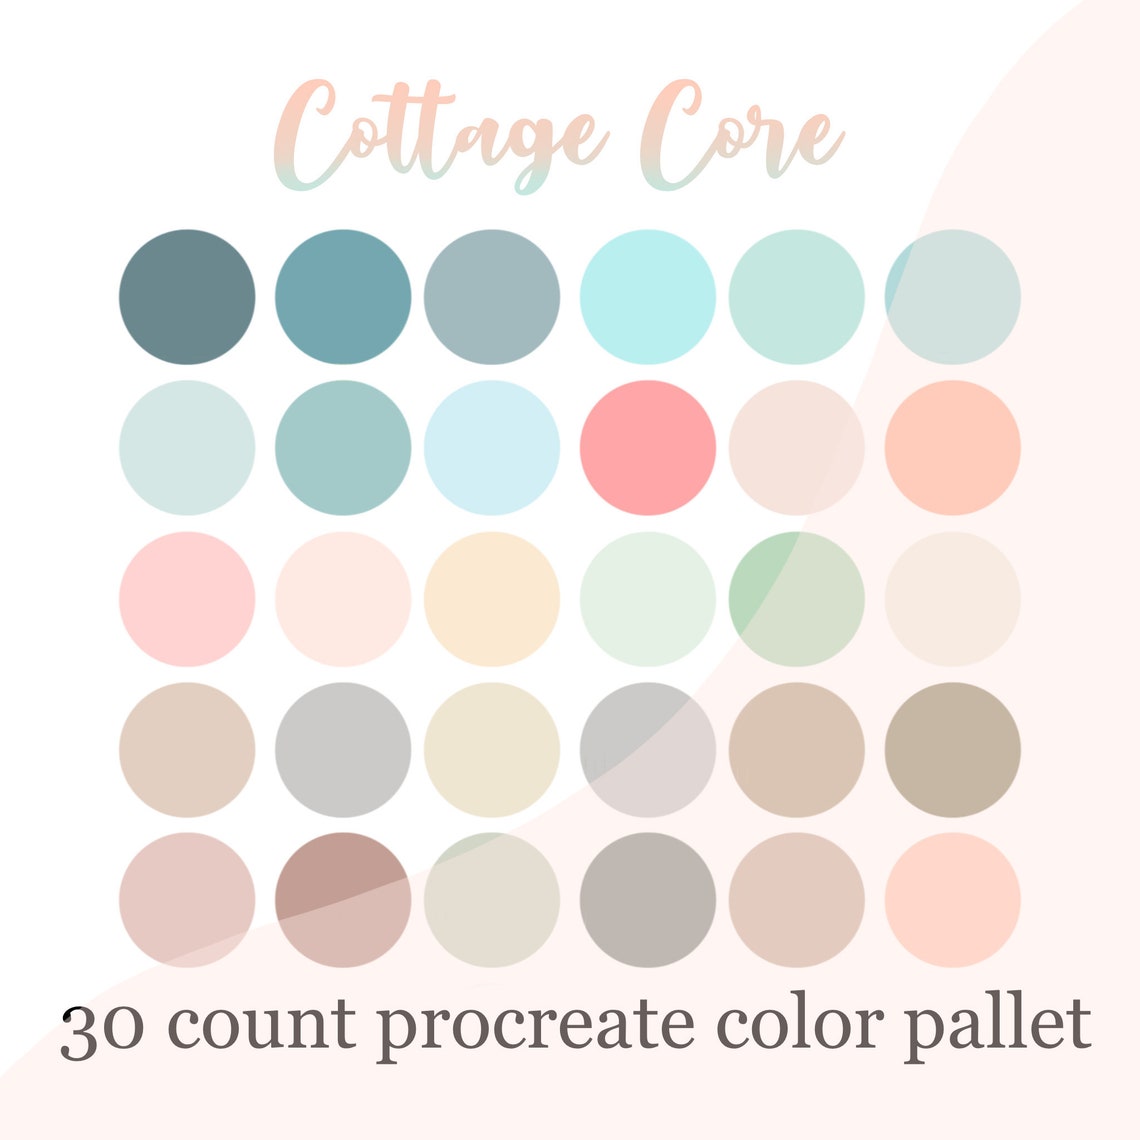 Color Tales: The Cottage Style Palette Guide